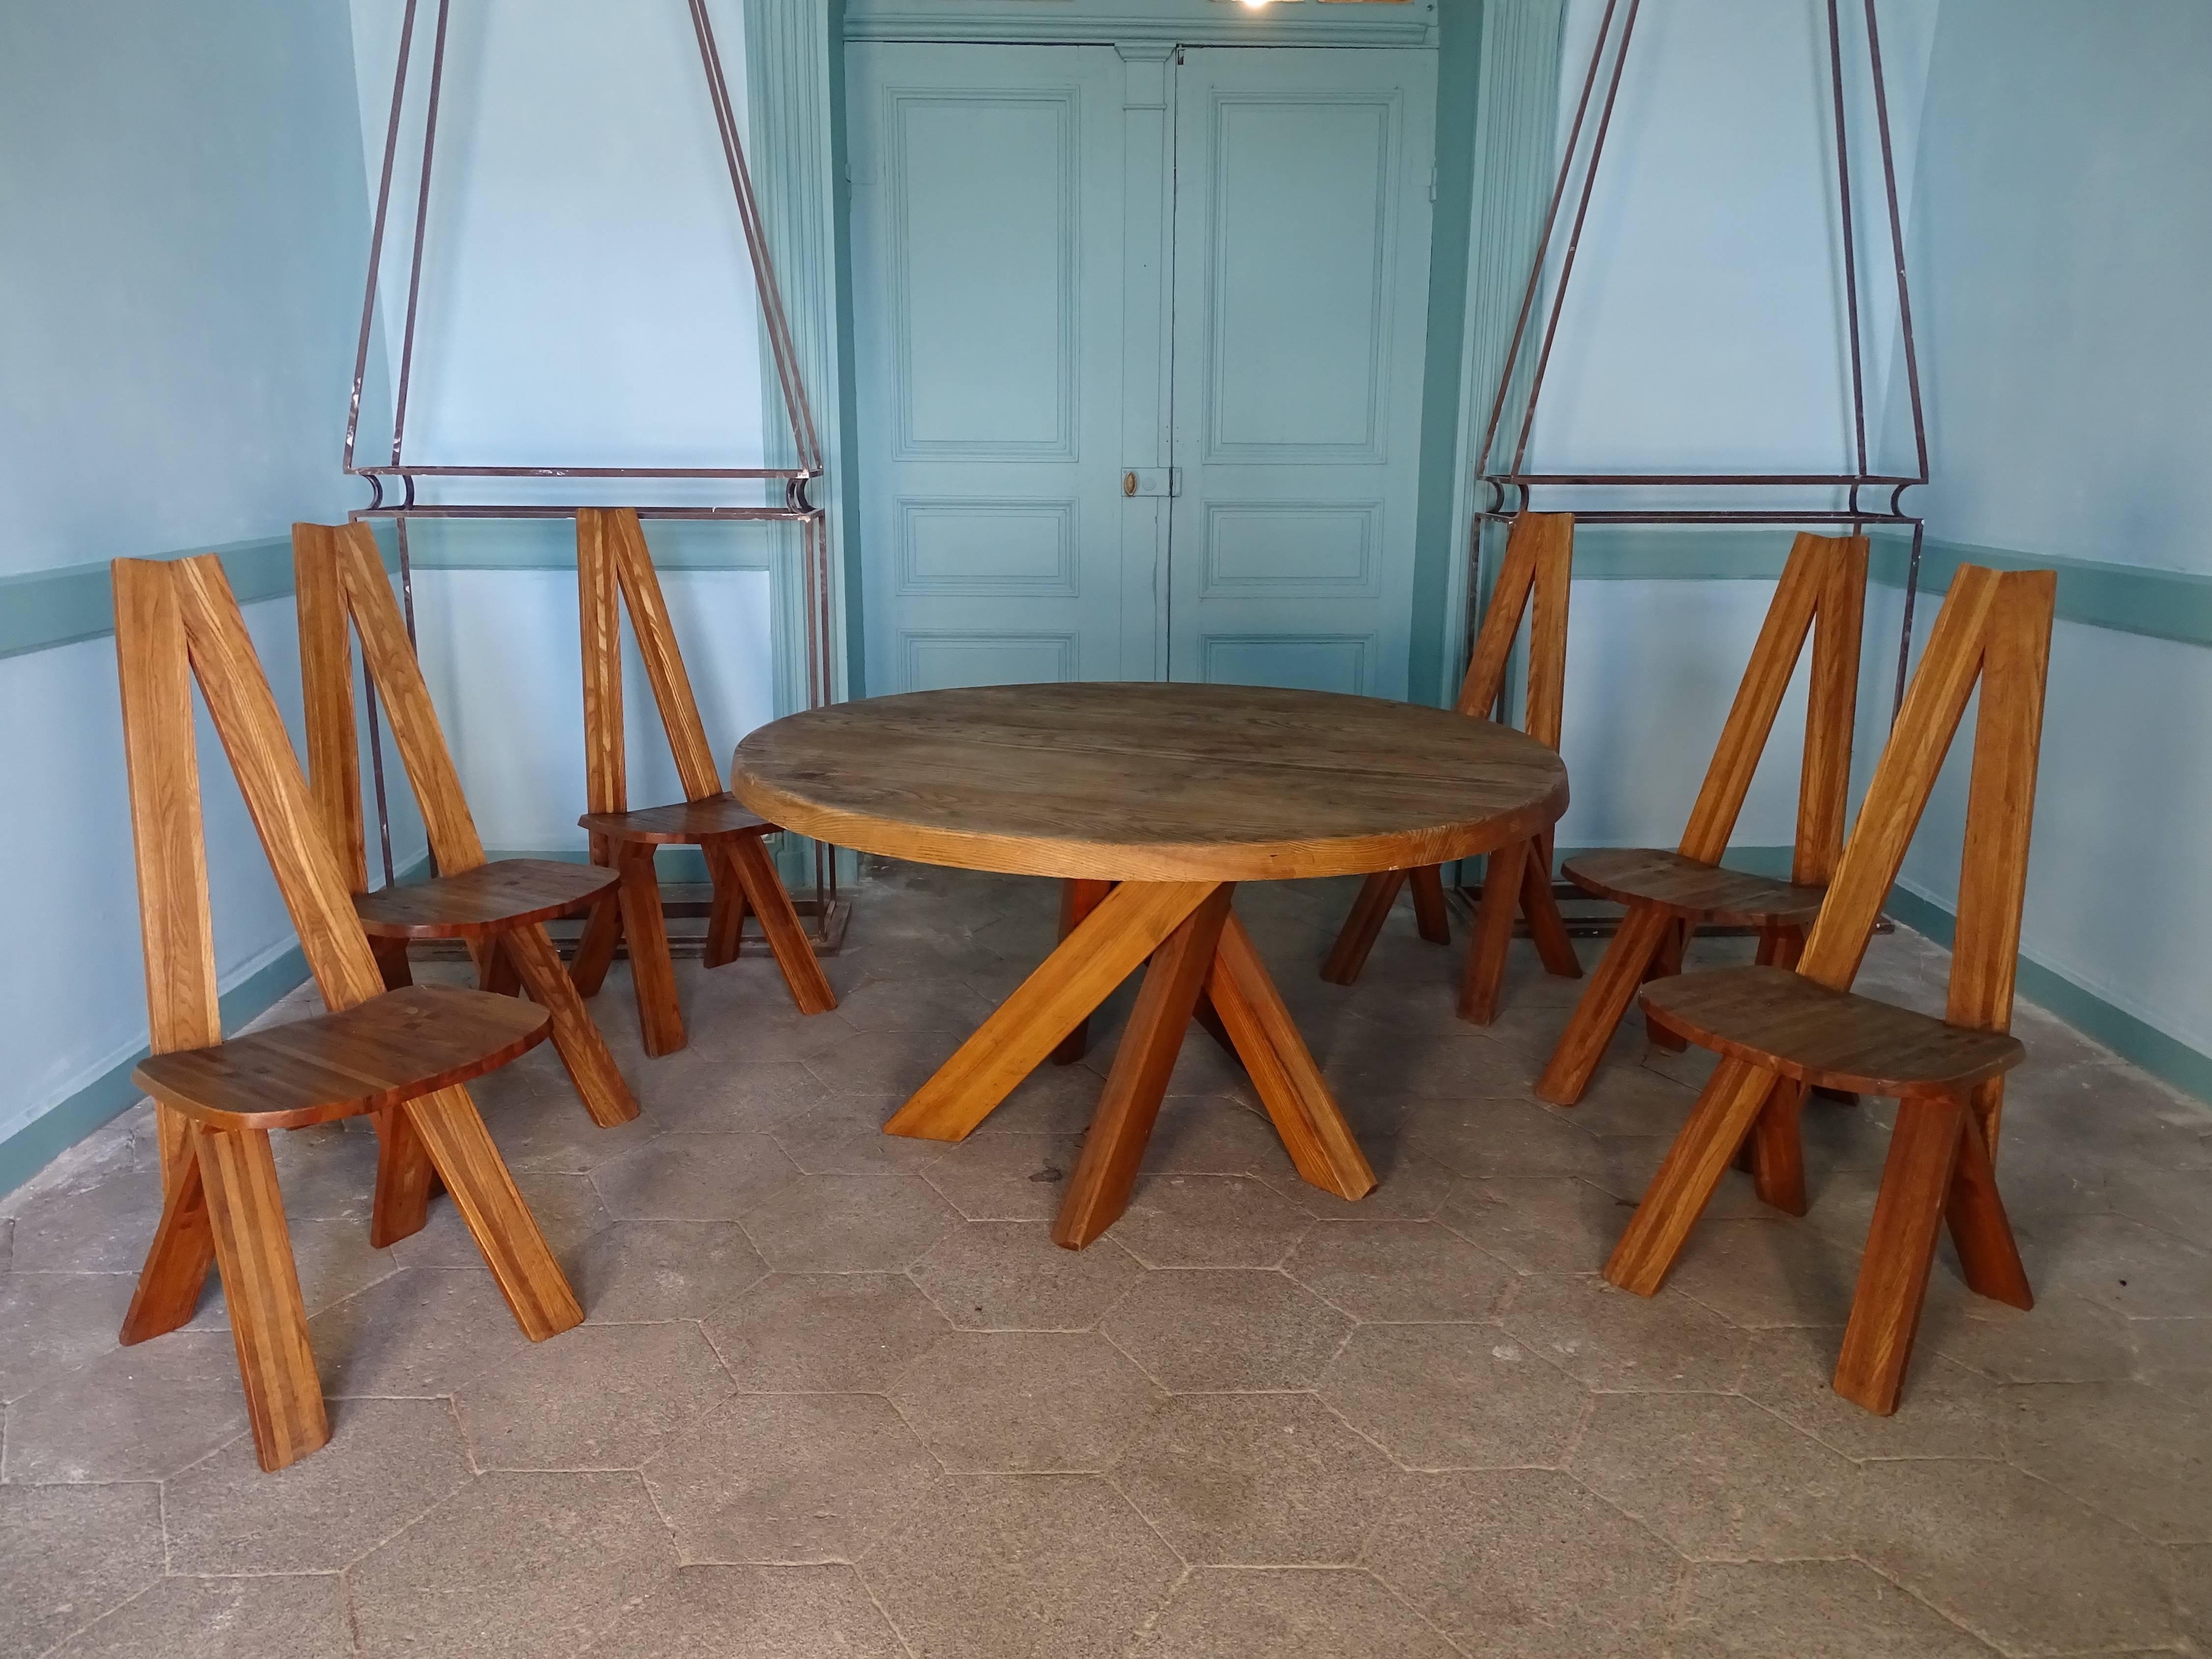 Incredible dining table designed by Pierre during the 1960. The set is composed of one big dining table model T21 or Sfax, and a set of six elm chairs, model S45. The table is composed of a circular top with a thickness of 7cm on a base made of five